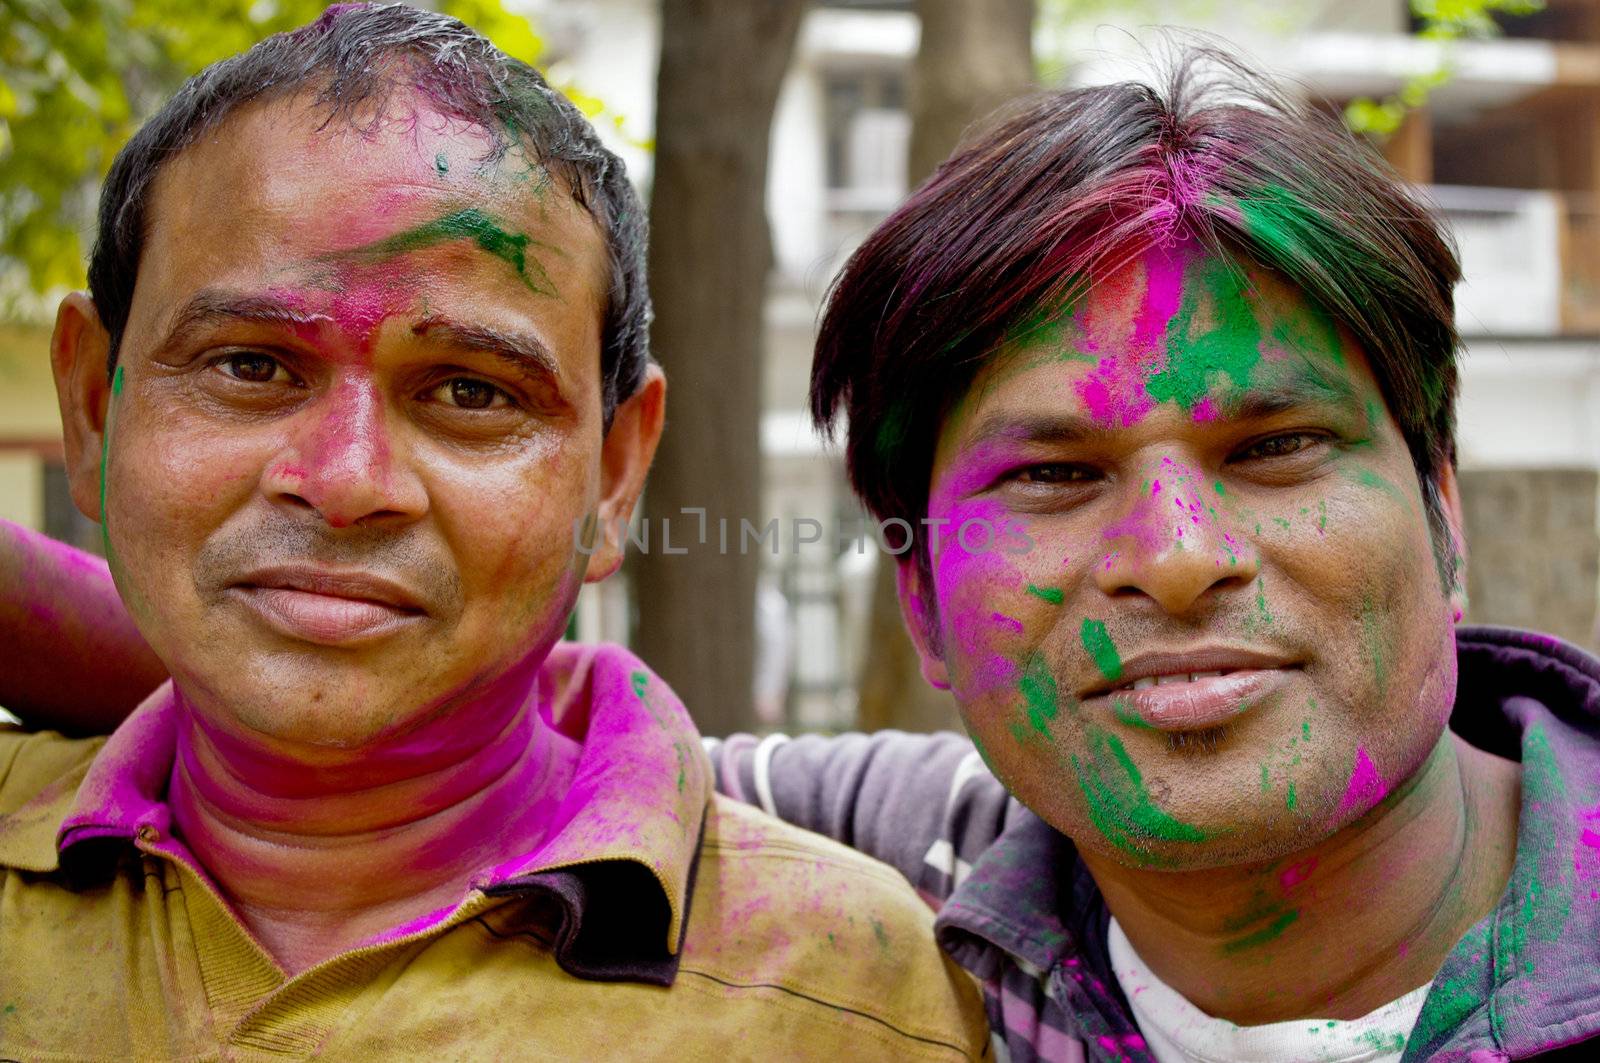 Two unidentified Paint covered Delhi residents attend in the spring & harvest festival, Holi. Colored paint smeared on faces to in-distinguish caste, class and race. New Delhi, India.